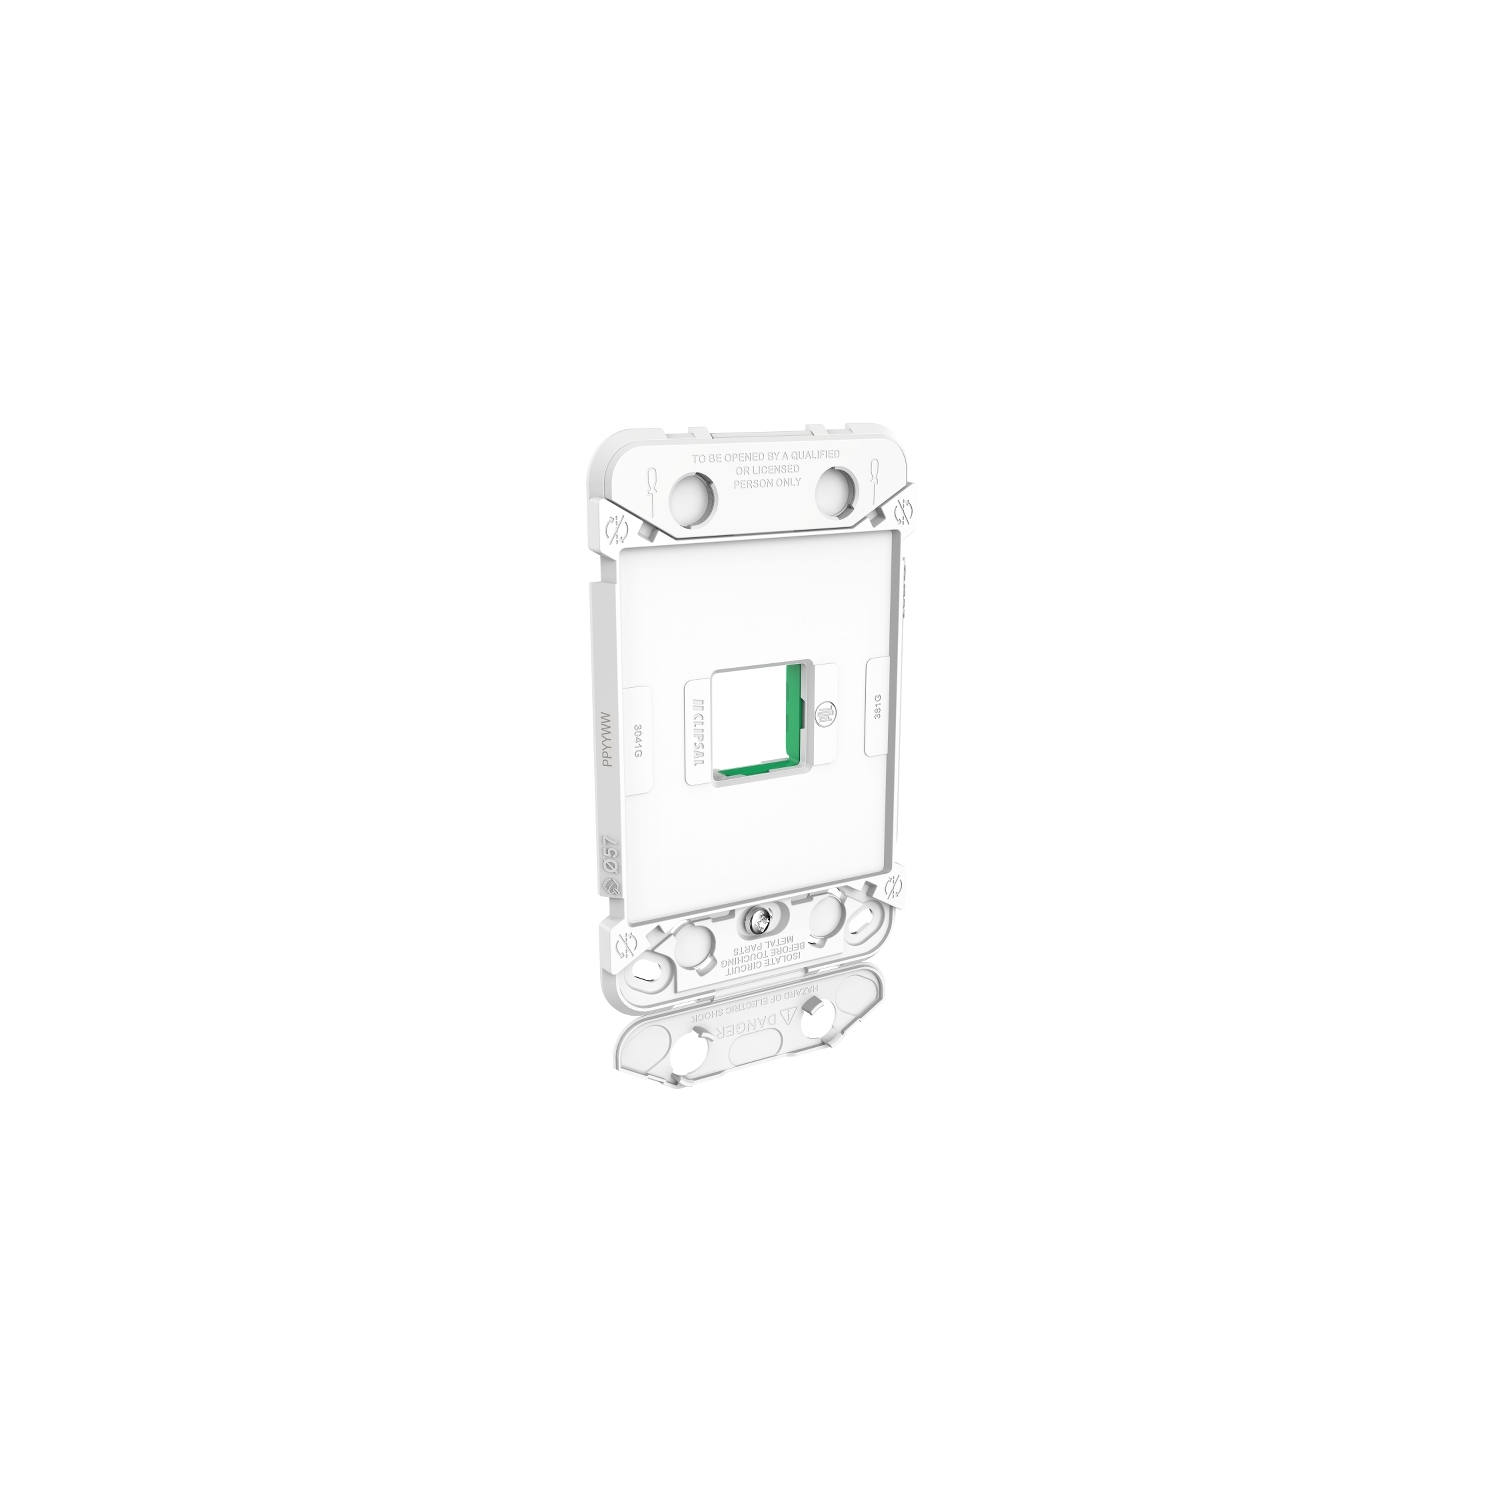 PDL381G - PDL Iconic Grid Plate Switch 1Gang